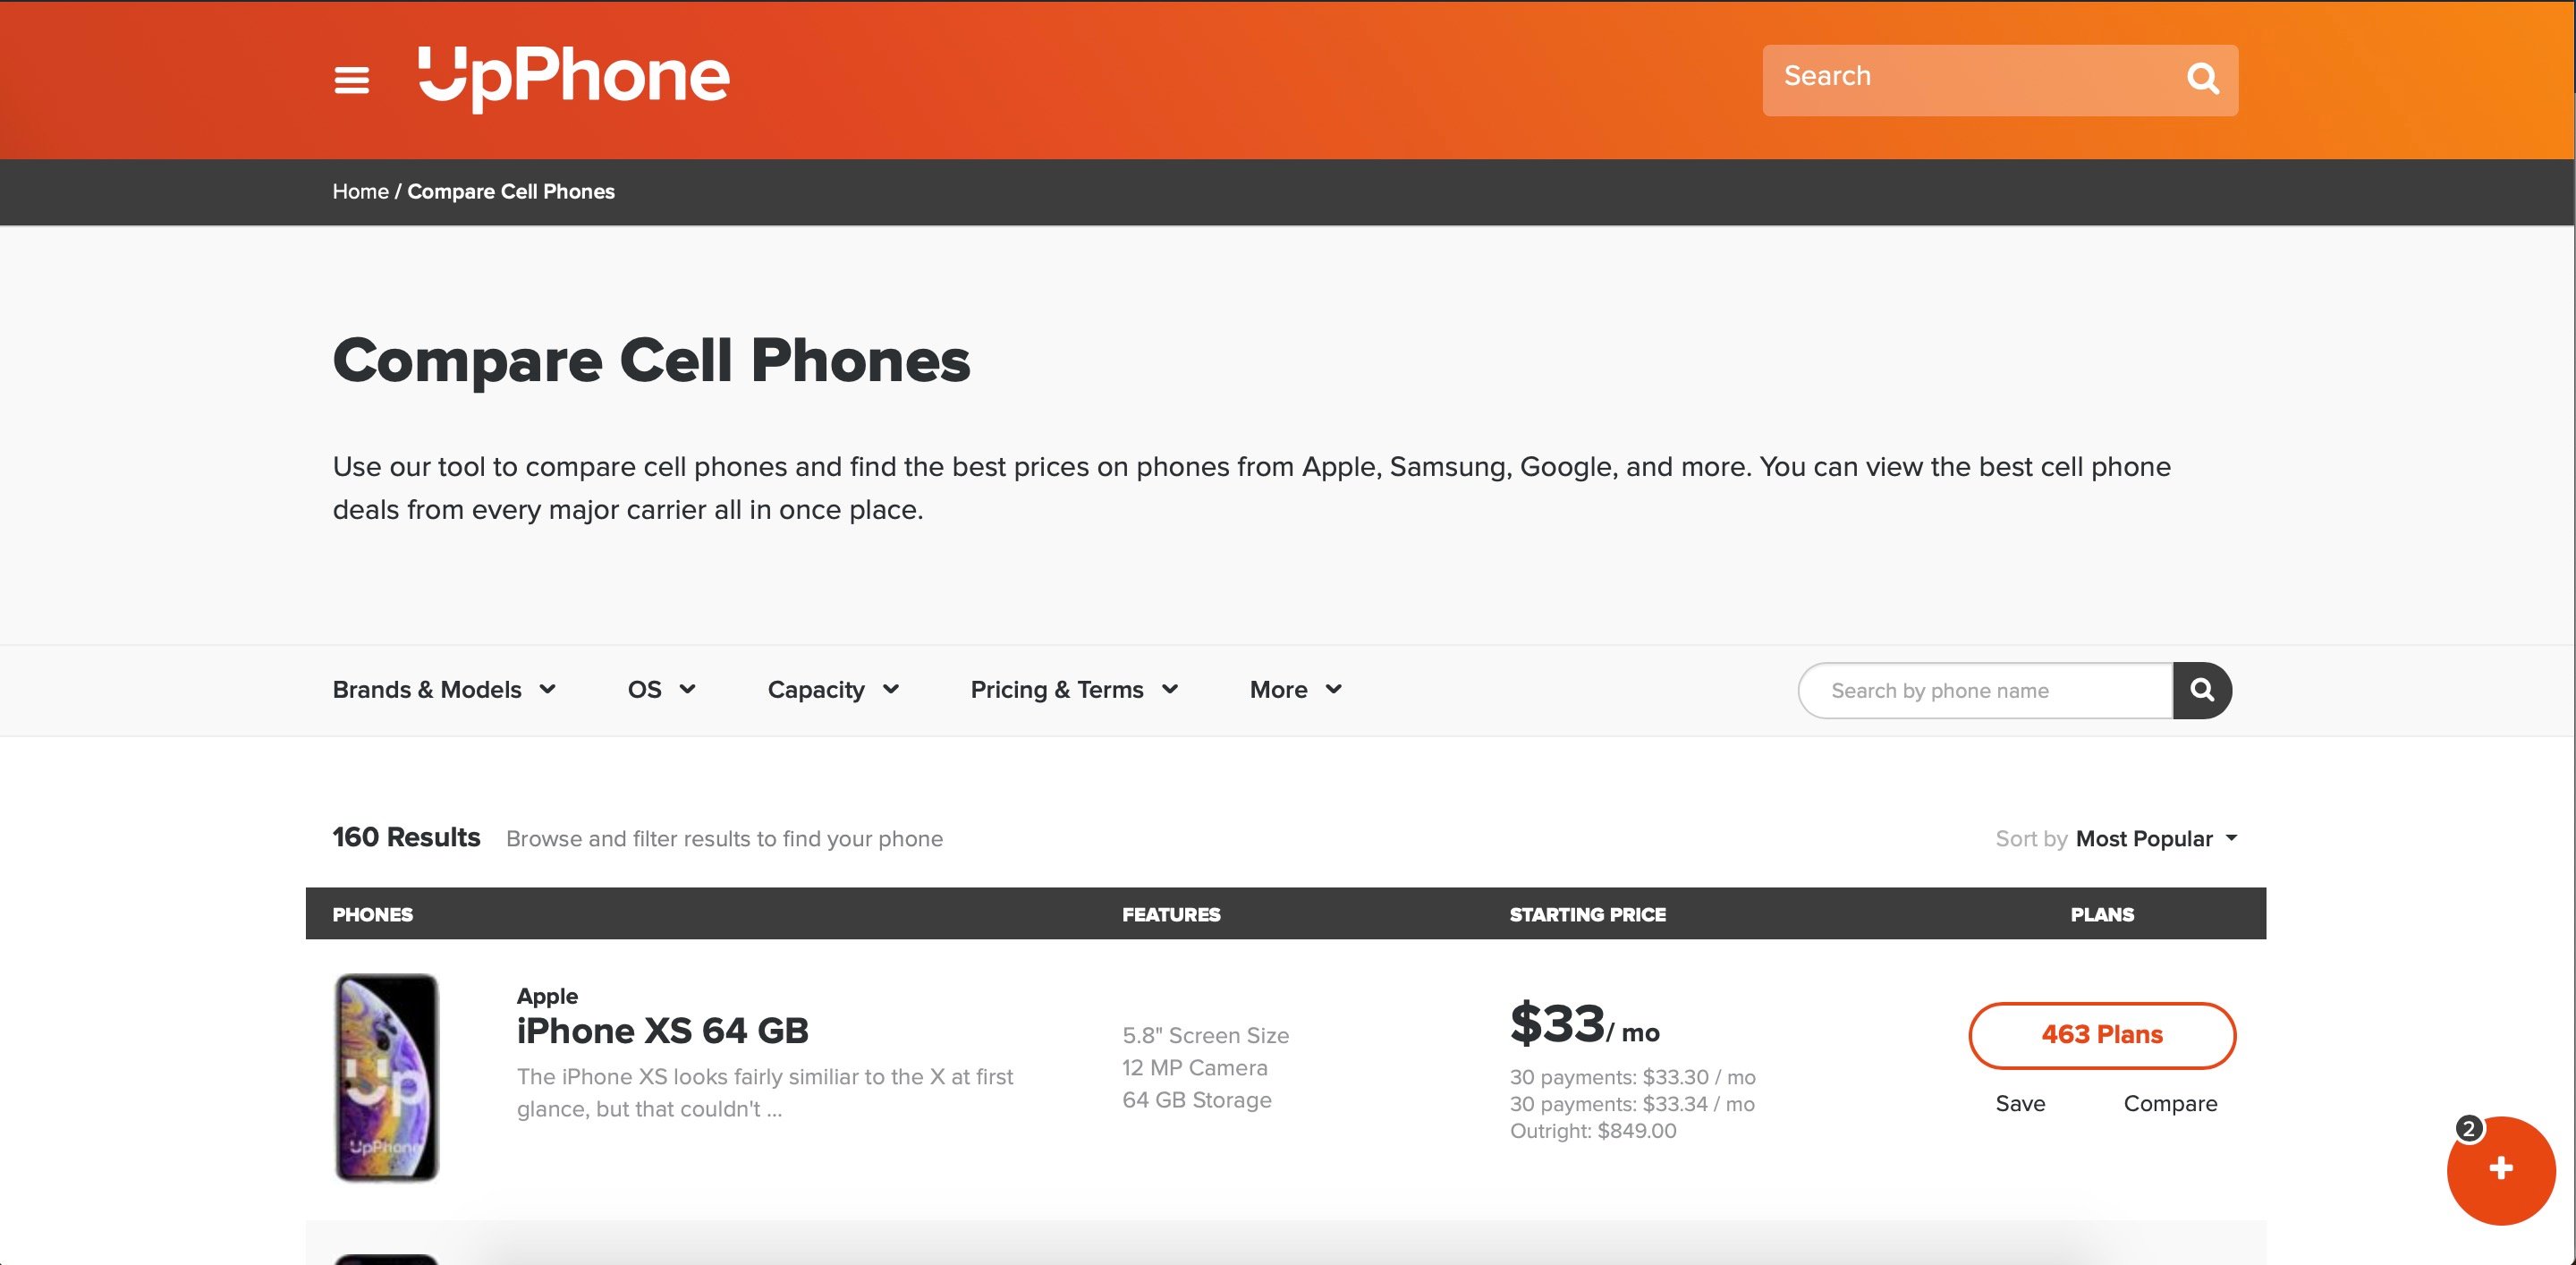 upphone compare cell phones tool